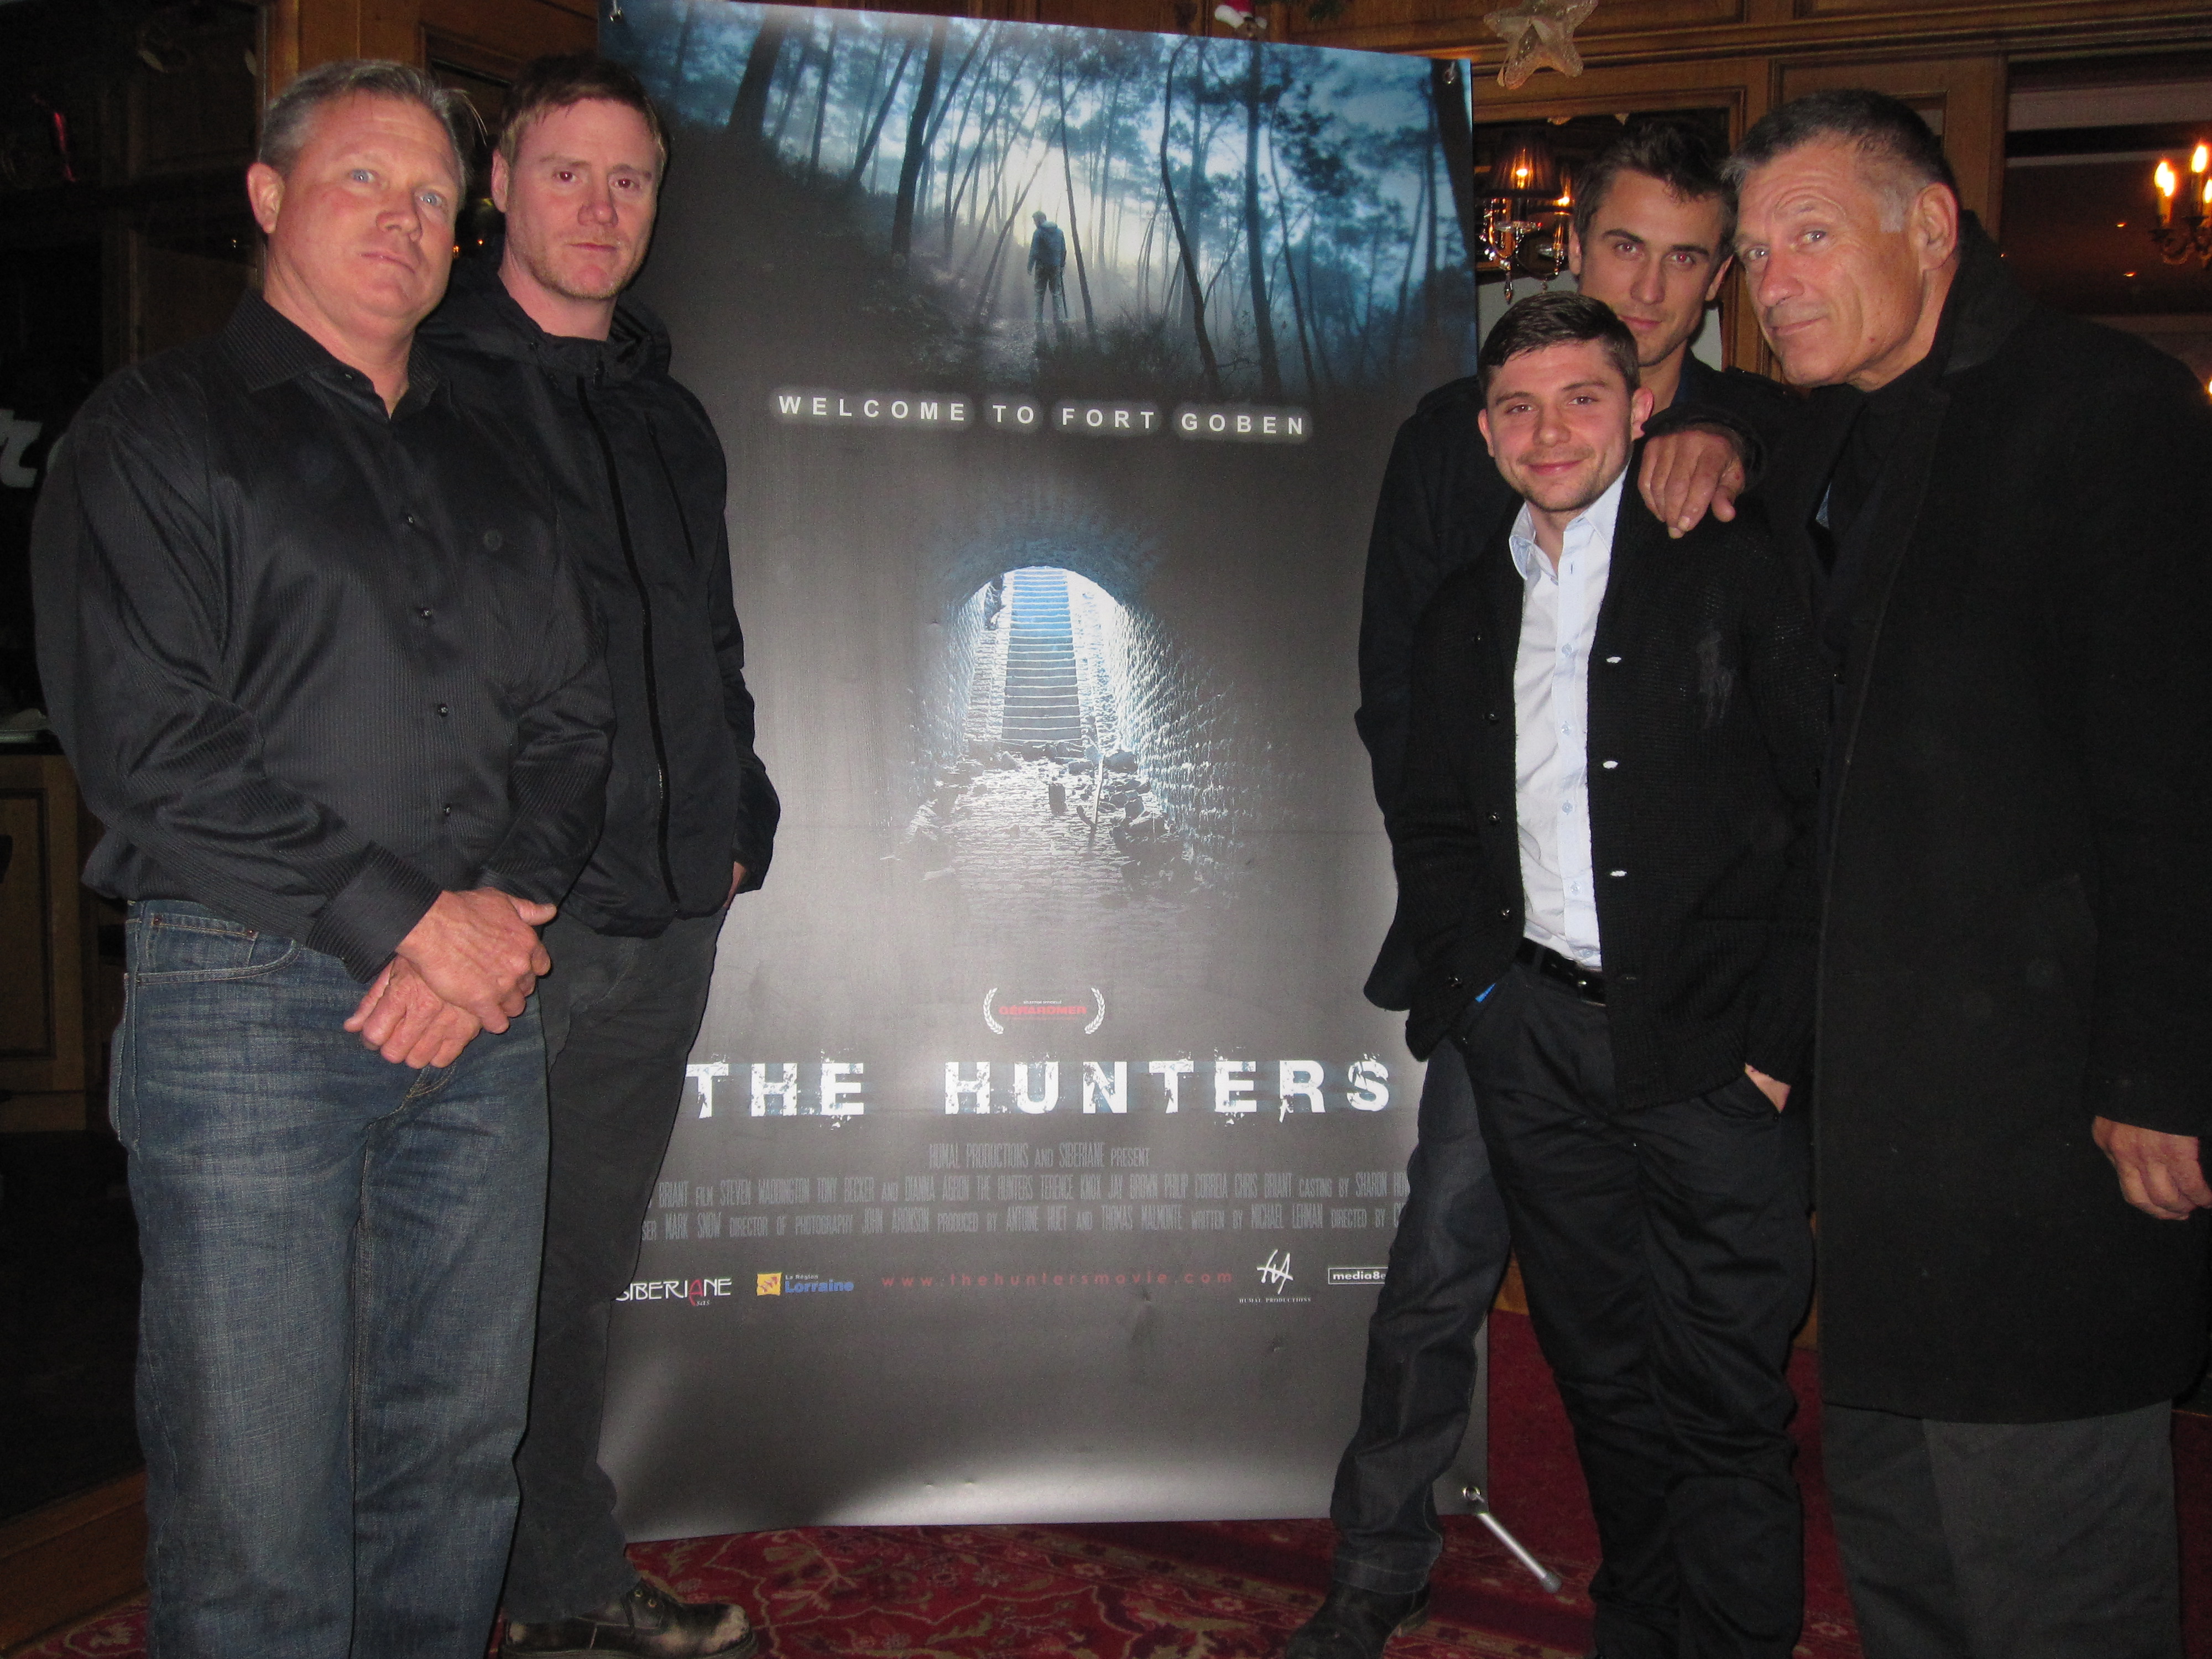 Tony Becker, Steven Waddington, Xavier Delambre, Jay Brown and Terence Knox attending the premiere of The Hunters at the Gerardmer Fantastic Film Festival 2011.